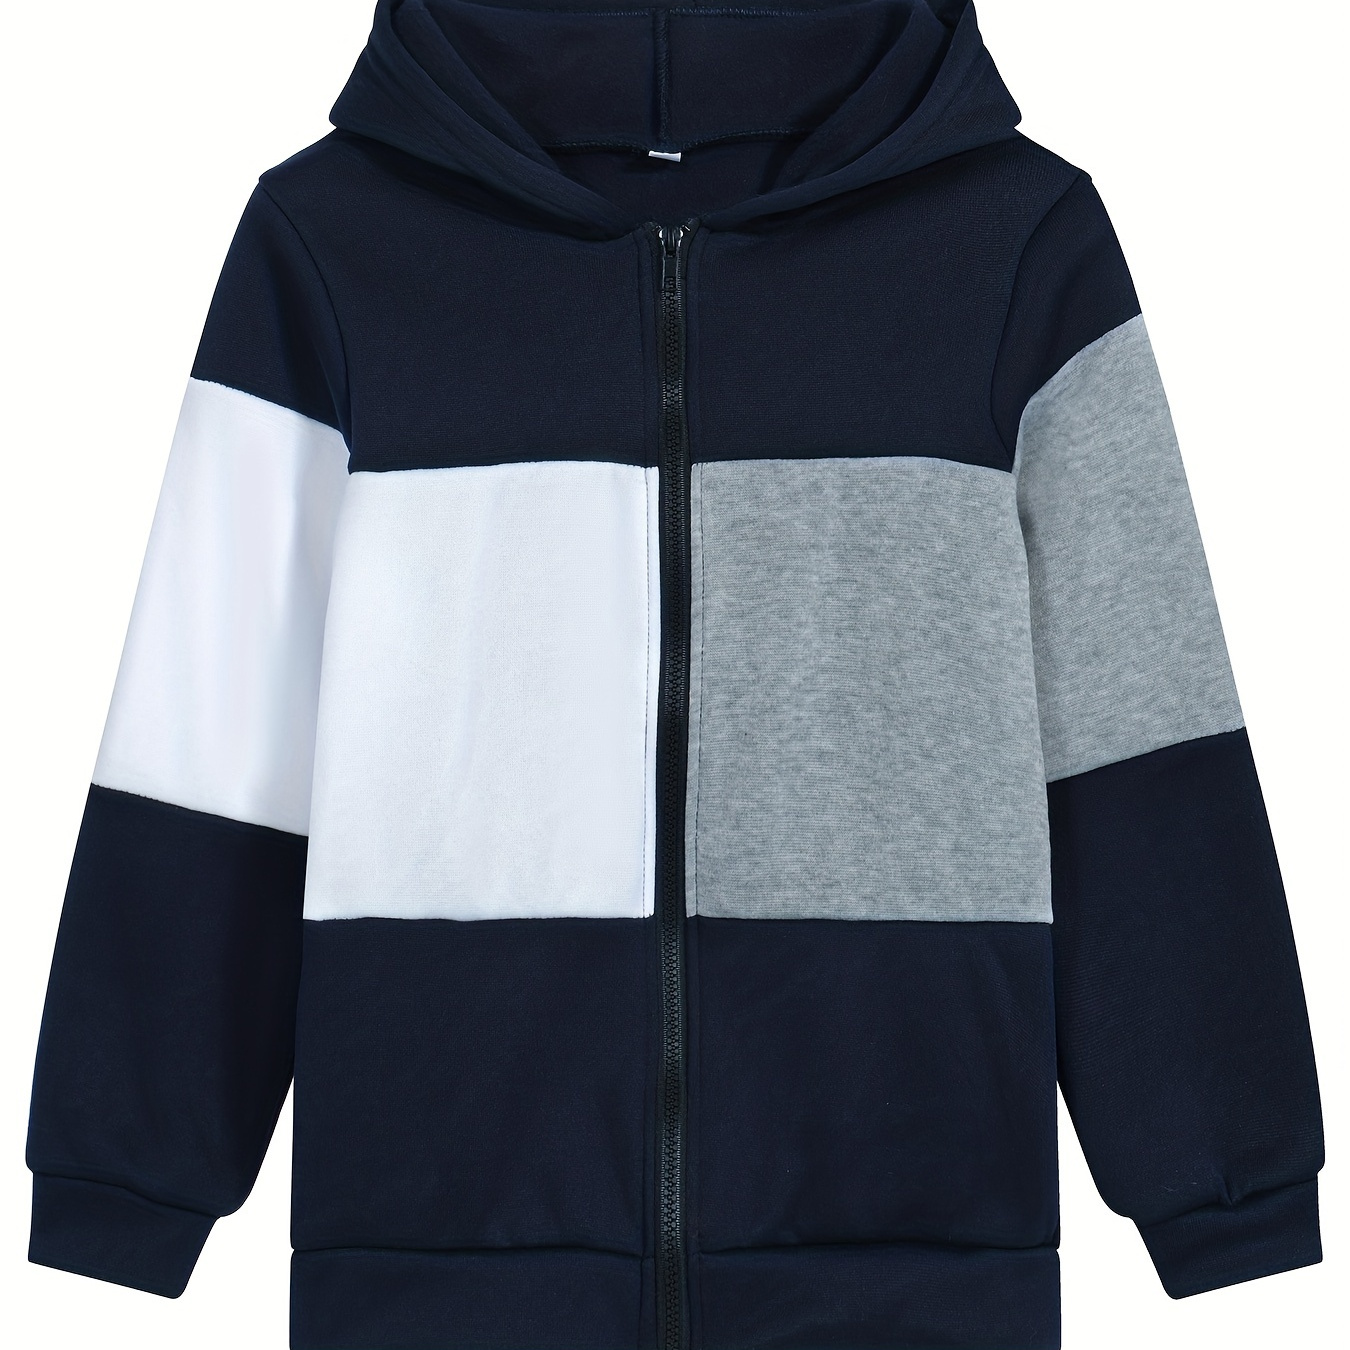 

Kid's Color Clash Hooded Jacket, Trendy Zipper Hoodie, Long Sleeve Coat, Boy's Clothes For Spring Fall Outdoor